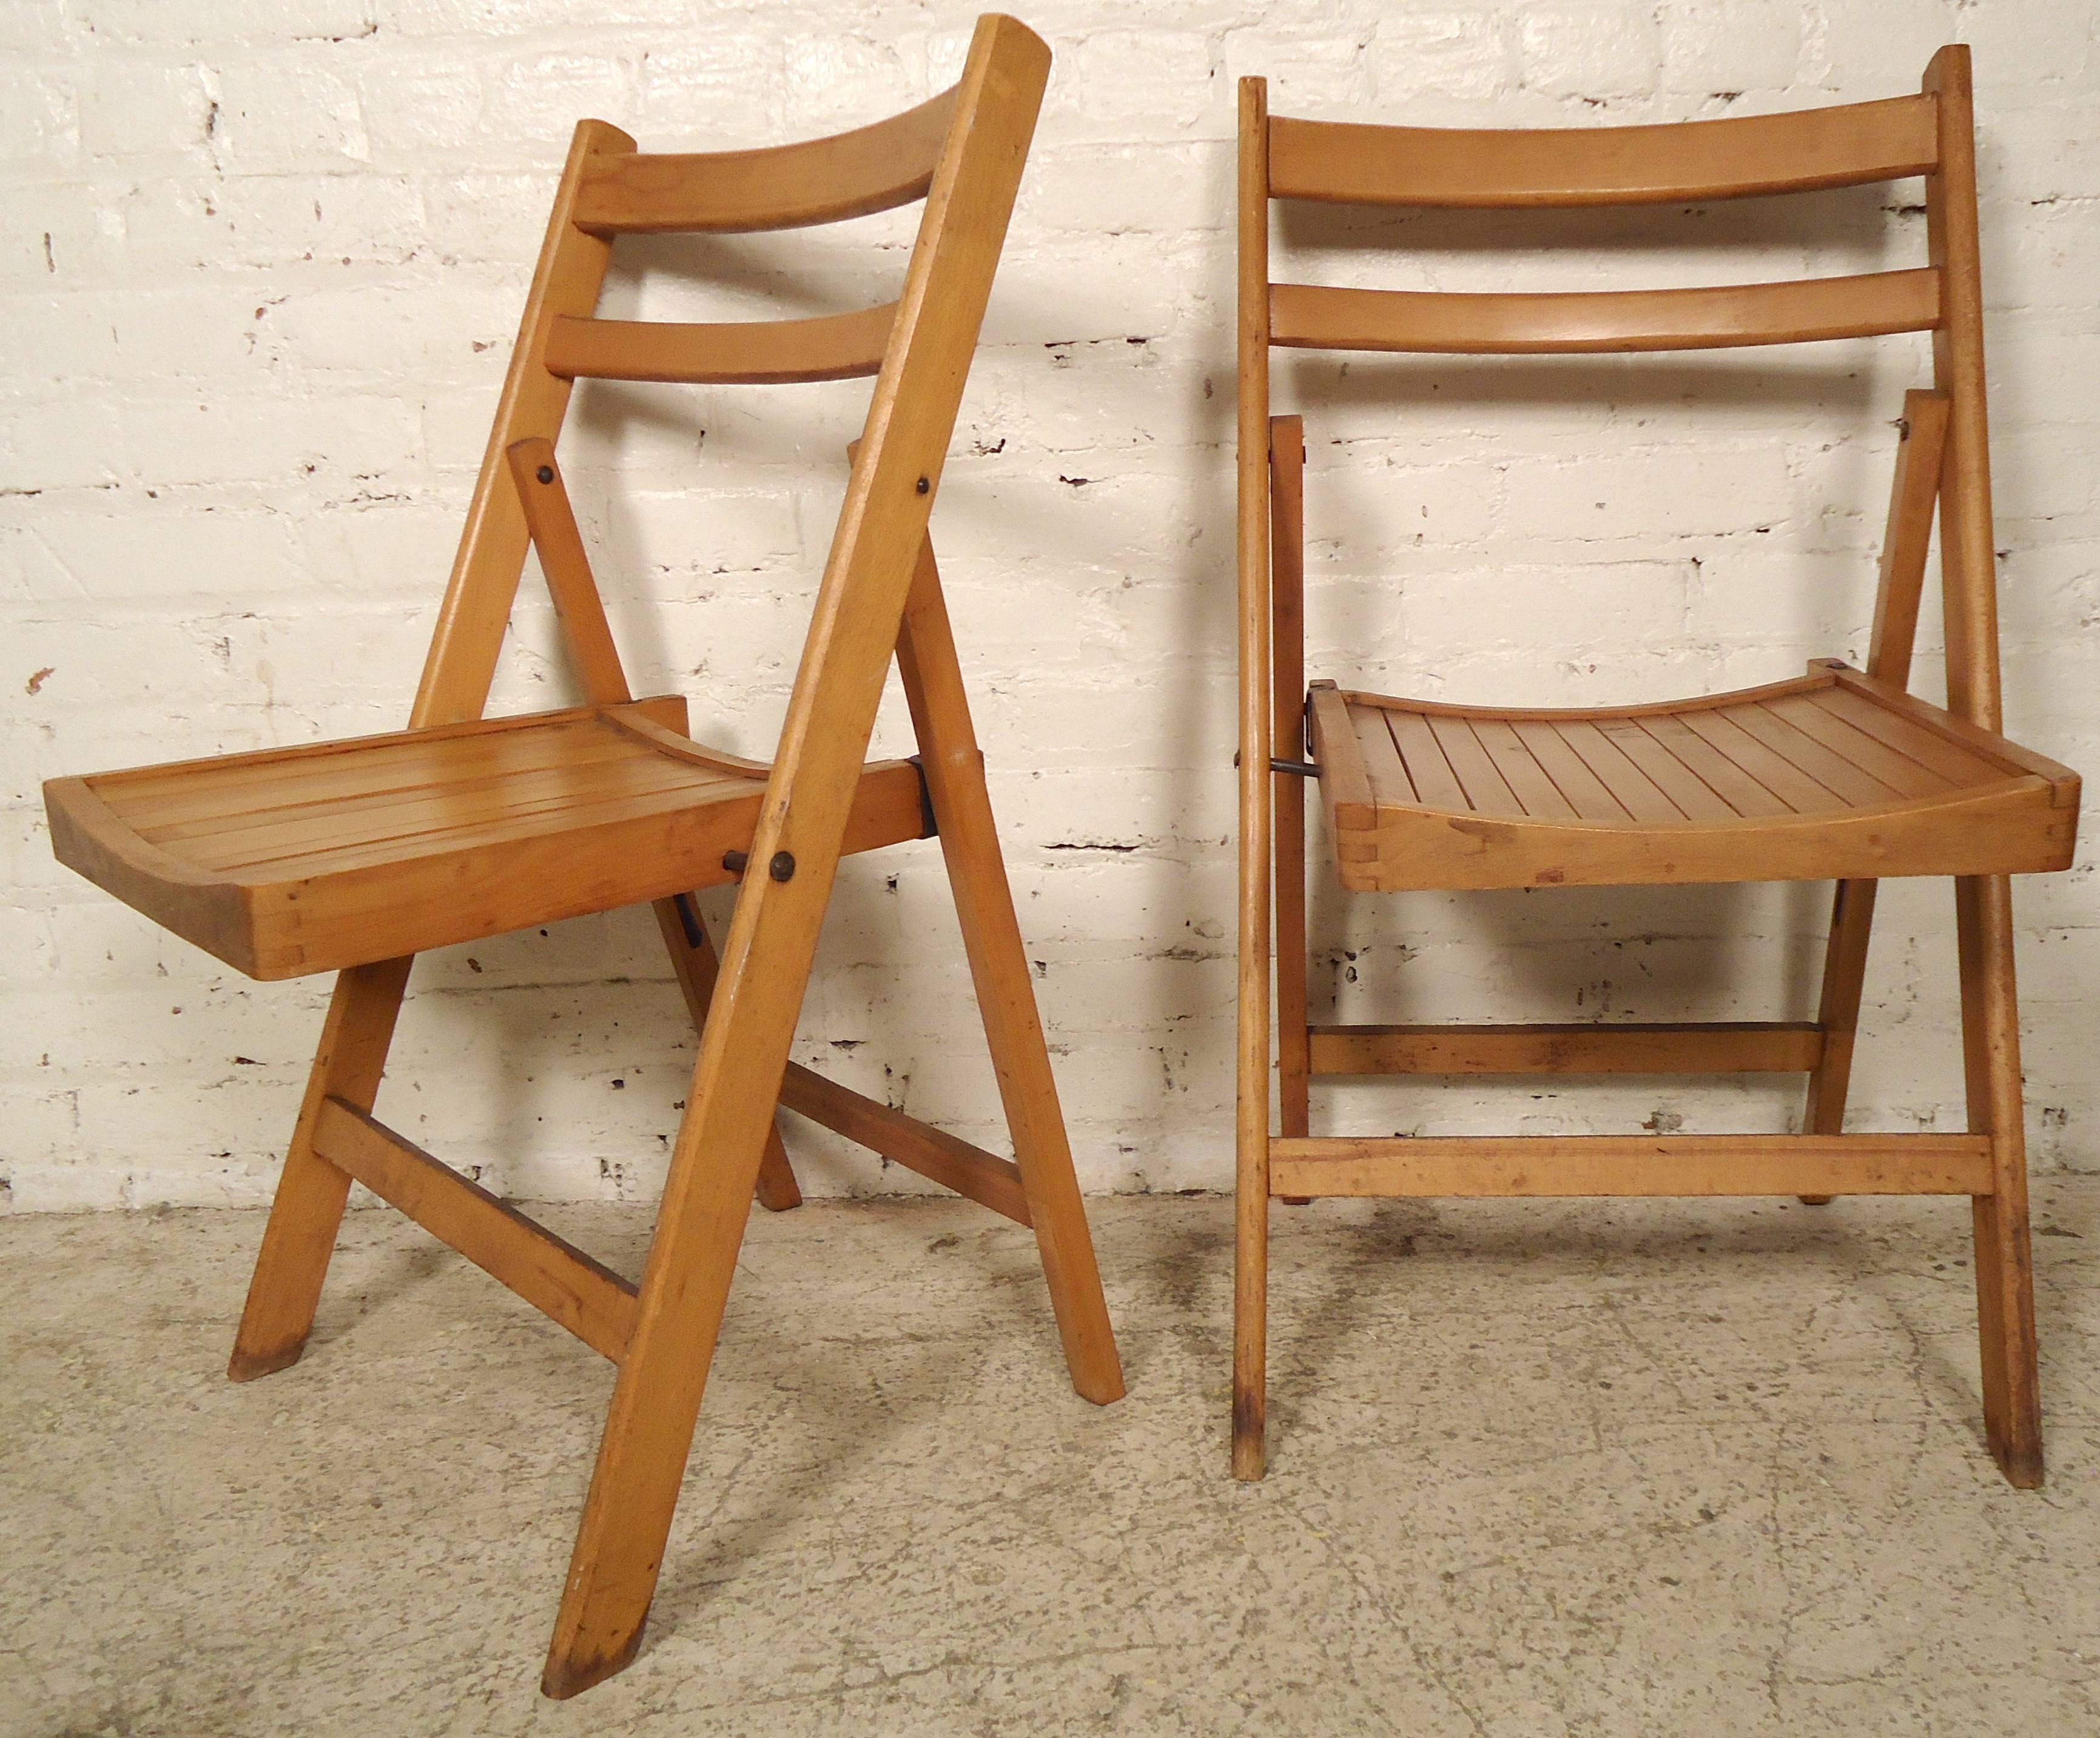 These collapsible chairs feature a slat seat, curved back and sturdy construction. These vintage church hall chairs would be functional in any modern restaurant, bar or dining room. Measuring 2" when folded.
More chairs available.

(Please